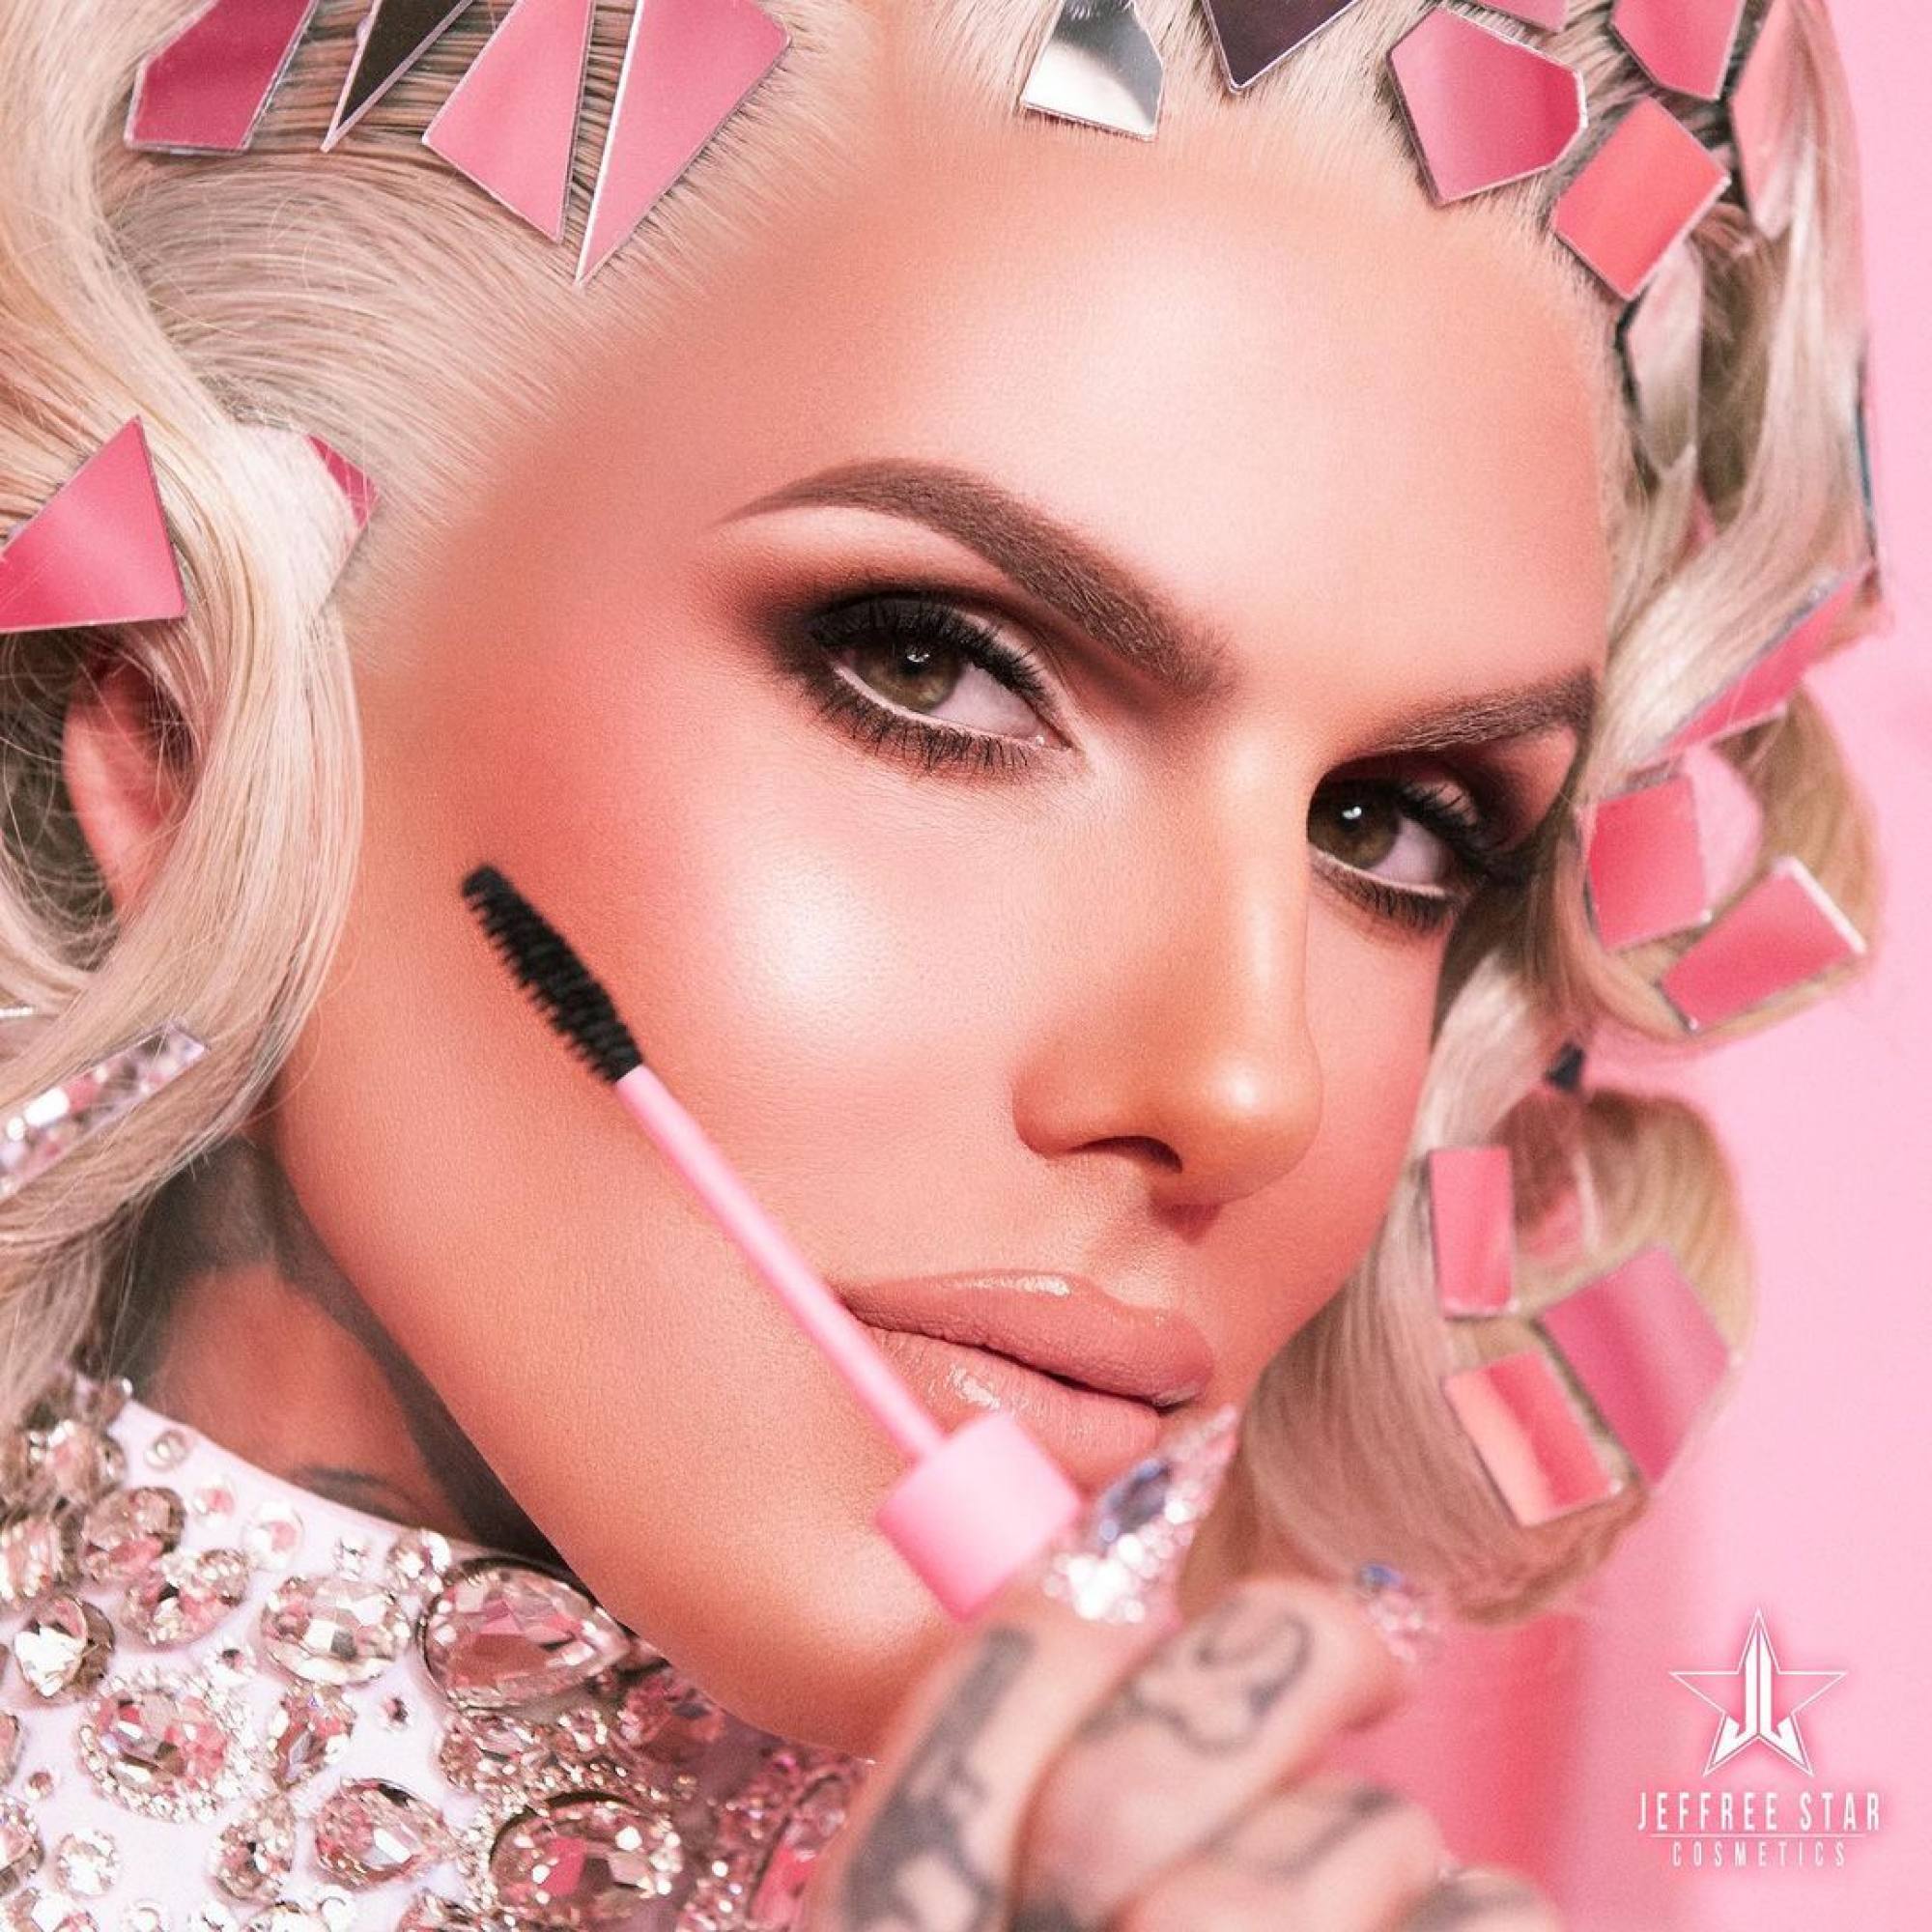 Jeffree Star Lists Pink Mansion For $3.6 Million: House Tour